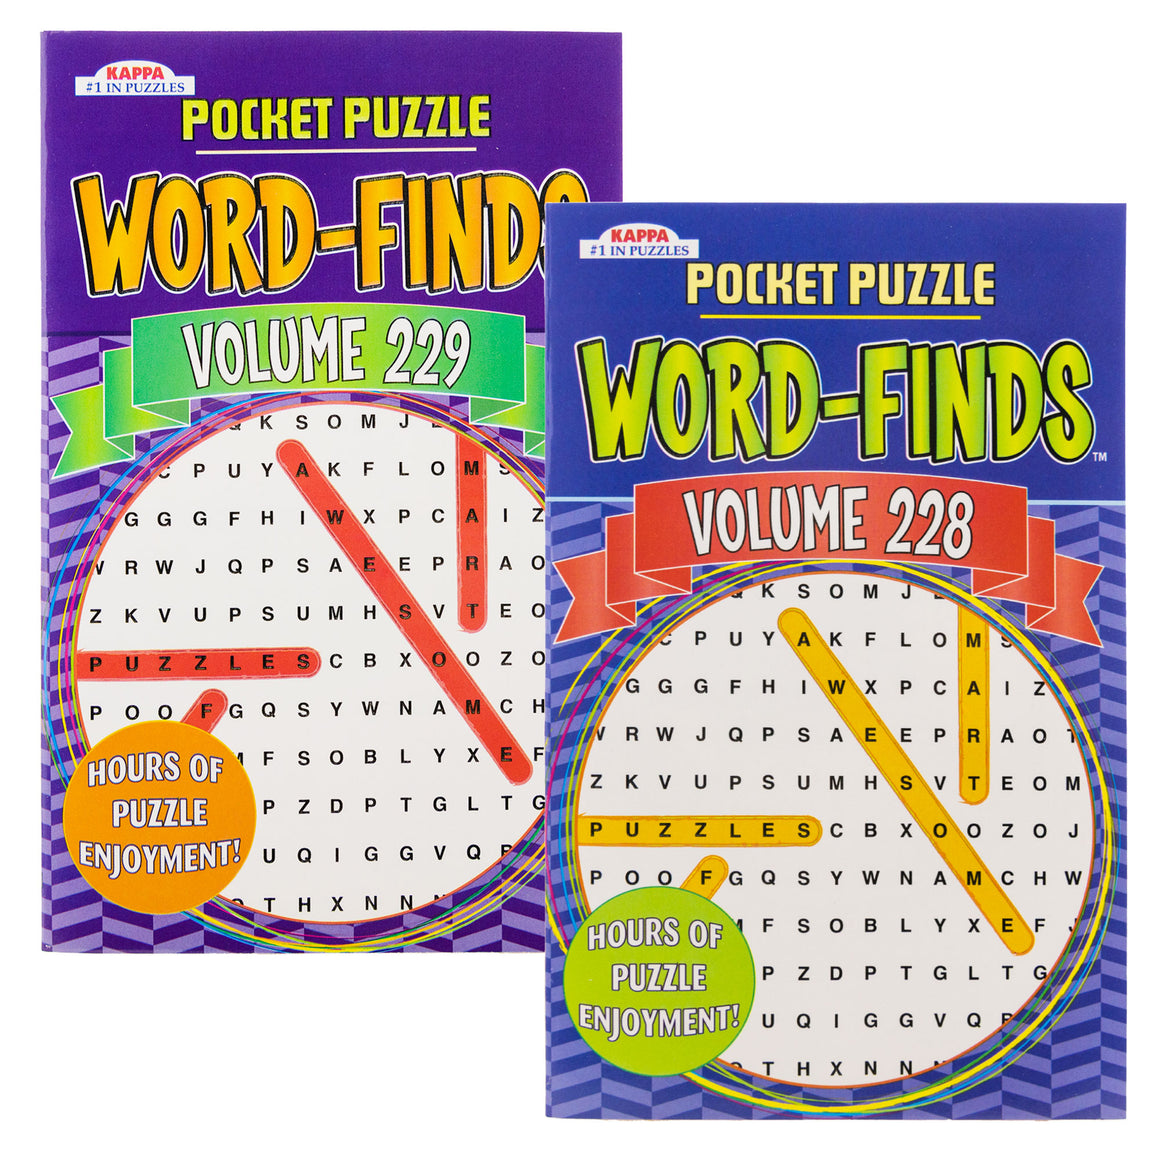 KAPPA Pocket Puzzle Word Finds Book - Digest Size